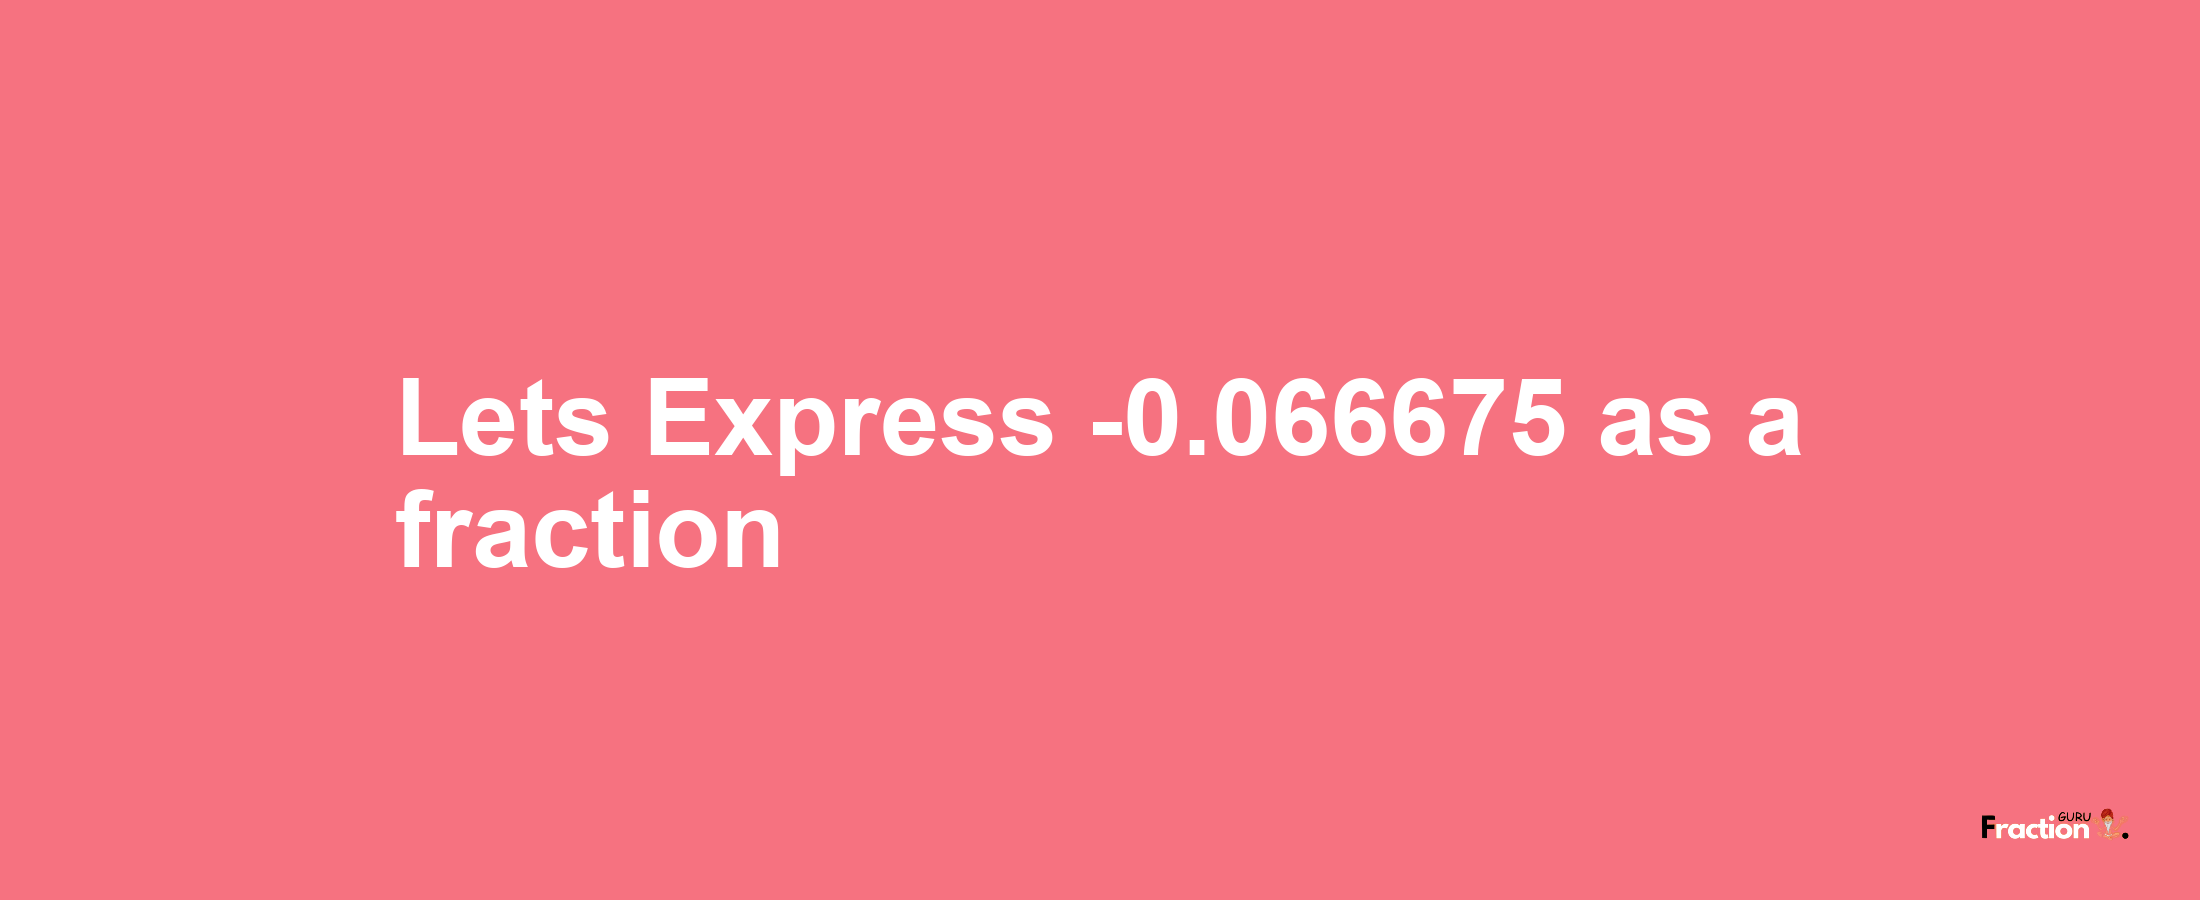 Lets Express -0.066675 as afraction